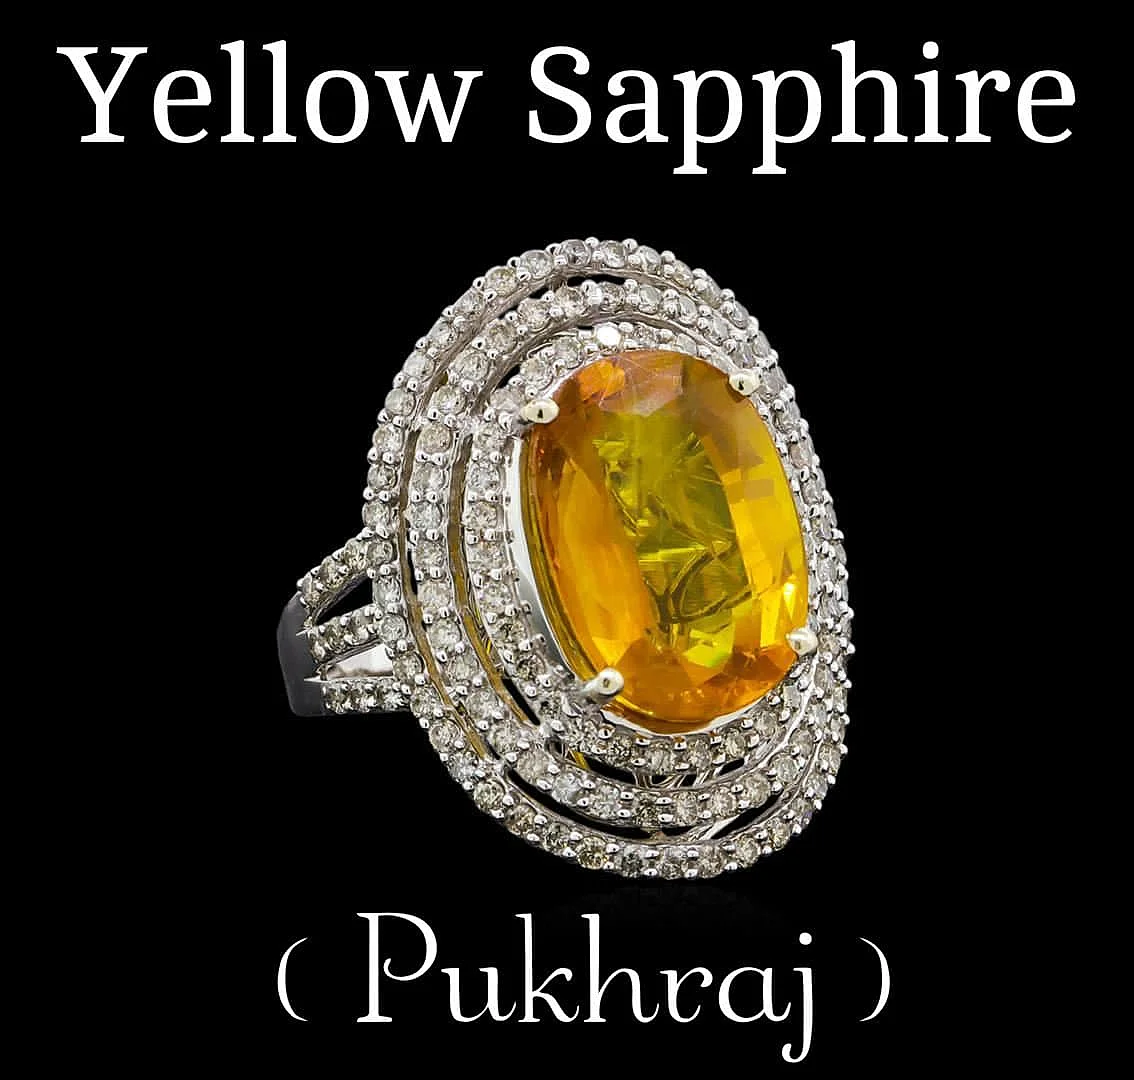 Does Wearing Yellow Sapphire Bring Good Luck?